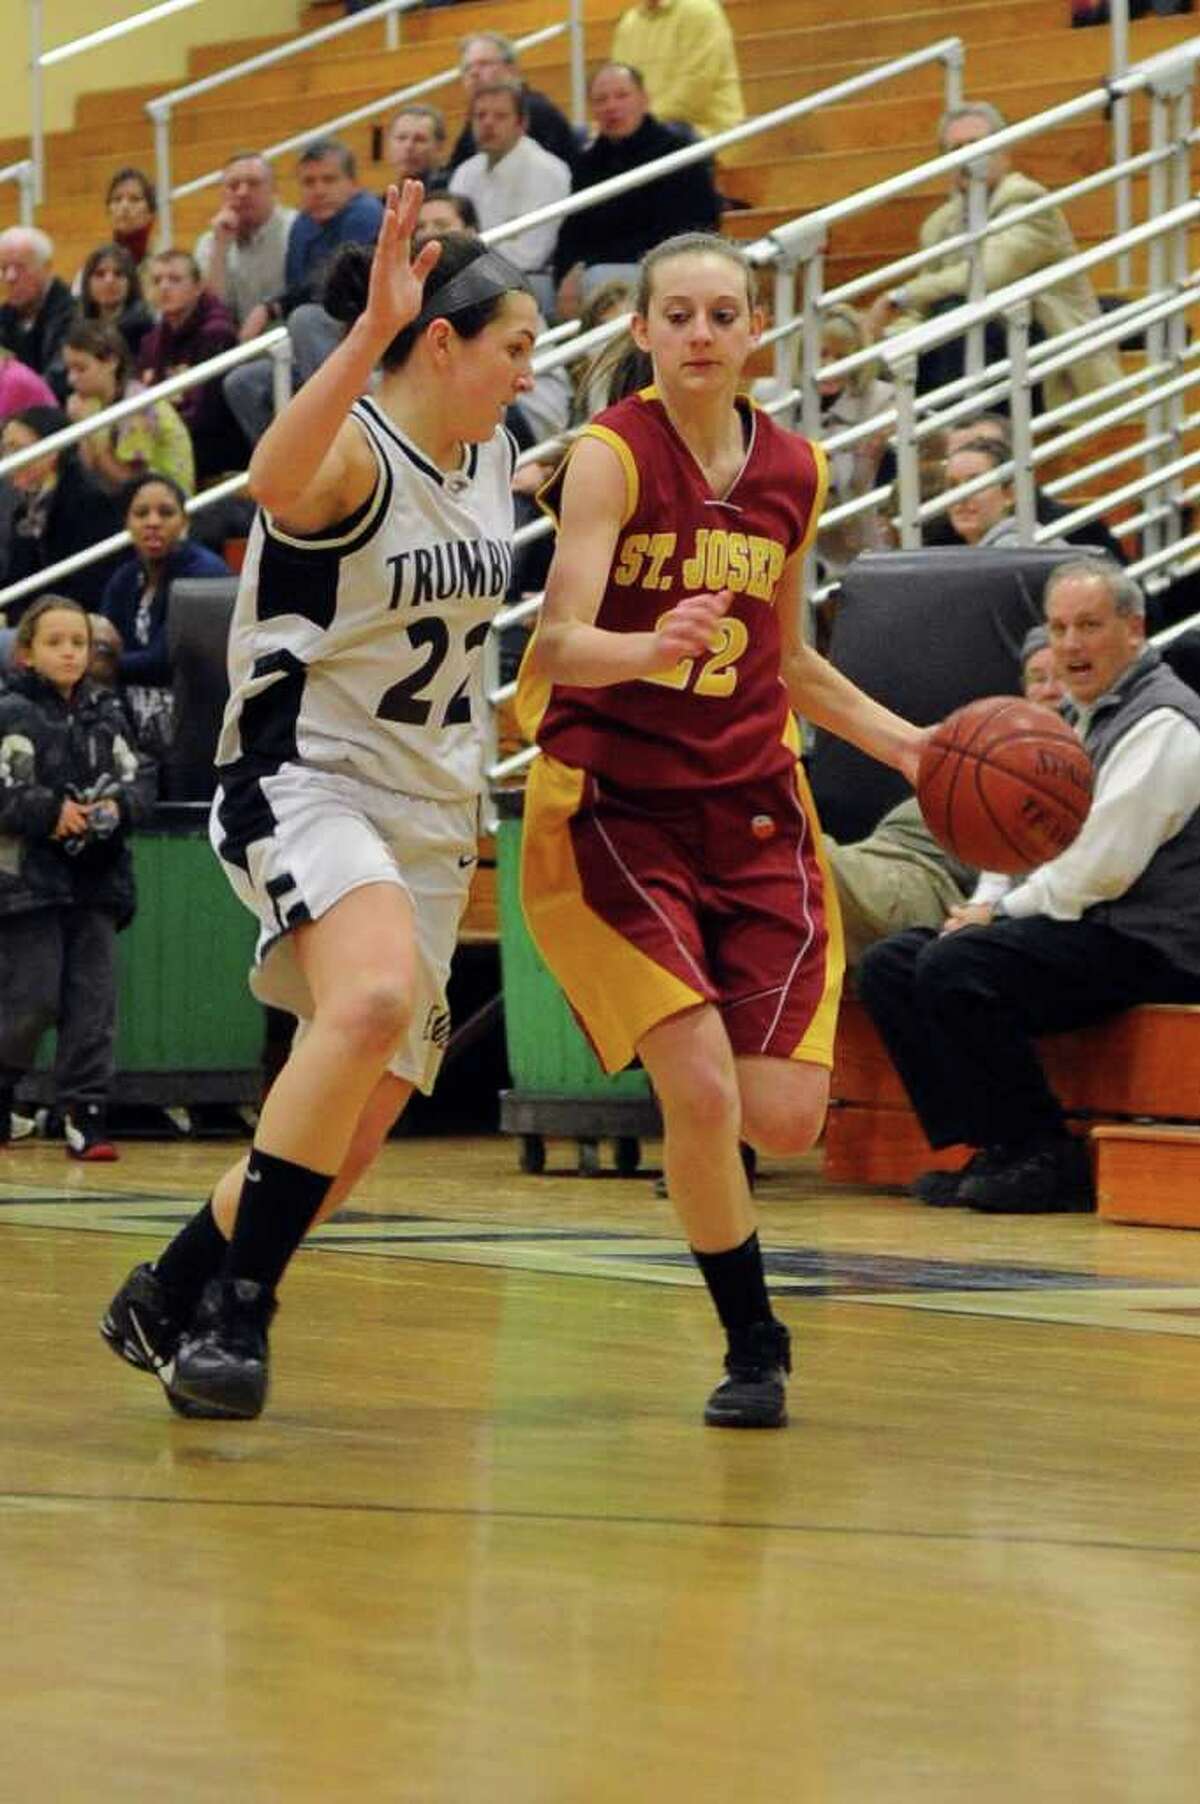 St. Joseph's Nancy Stablein dribbles as she is defended by Trumbull's Kelly Coughlin during Tuesday's game at Trumbull High School on January 25, 2011.